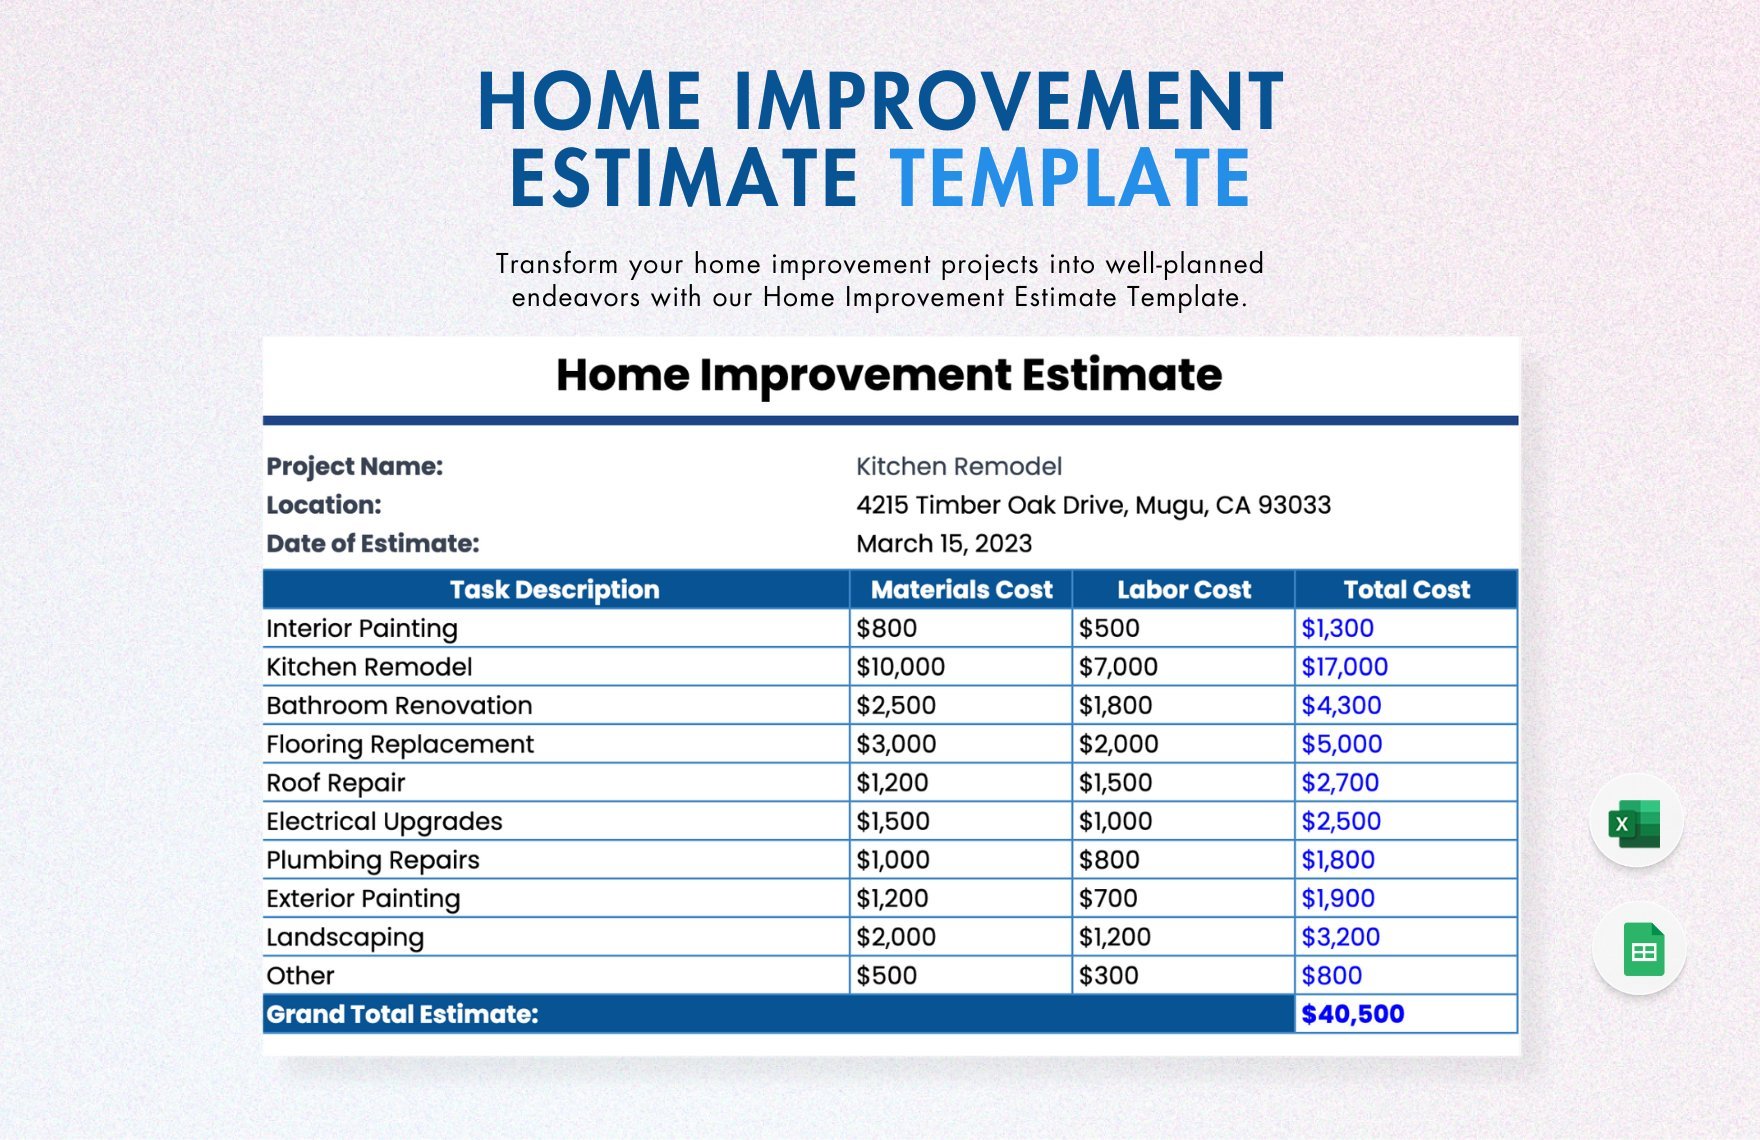 Free Home Improvement Estimate Template in Excel, Google Sheets